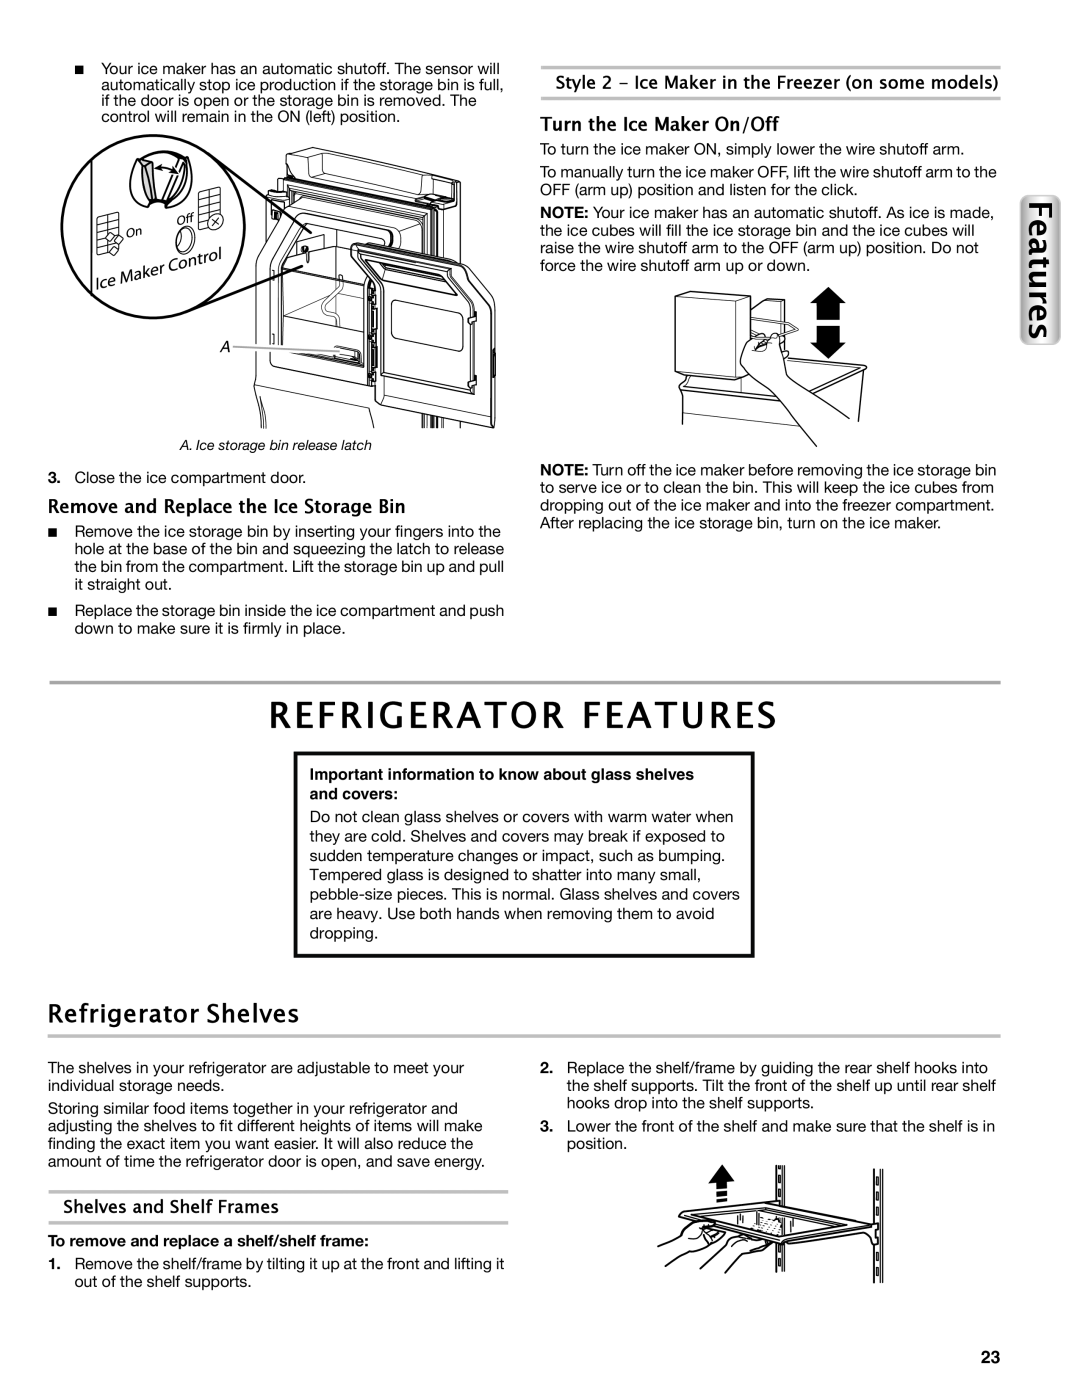 Maytag W10558104A manual Refrigerator Features, Refrigerator Shelves, Turn the Ice Maker On/Off, Shelves and Shelf Frames 